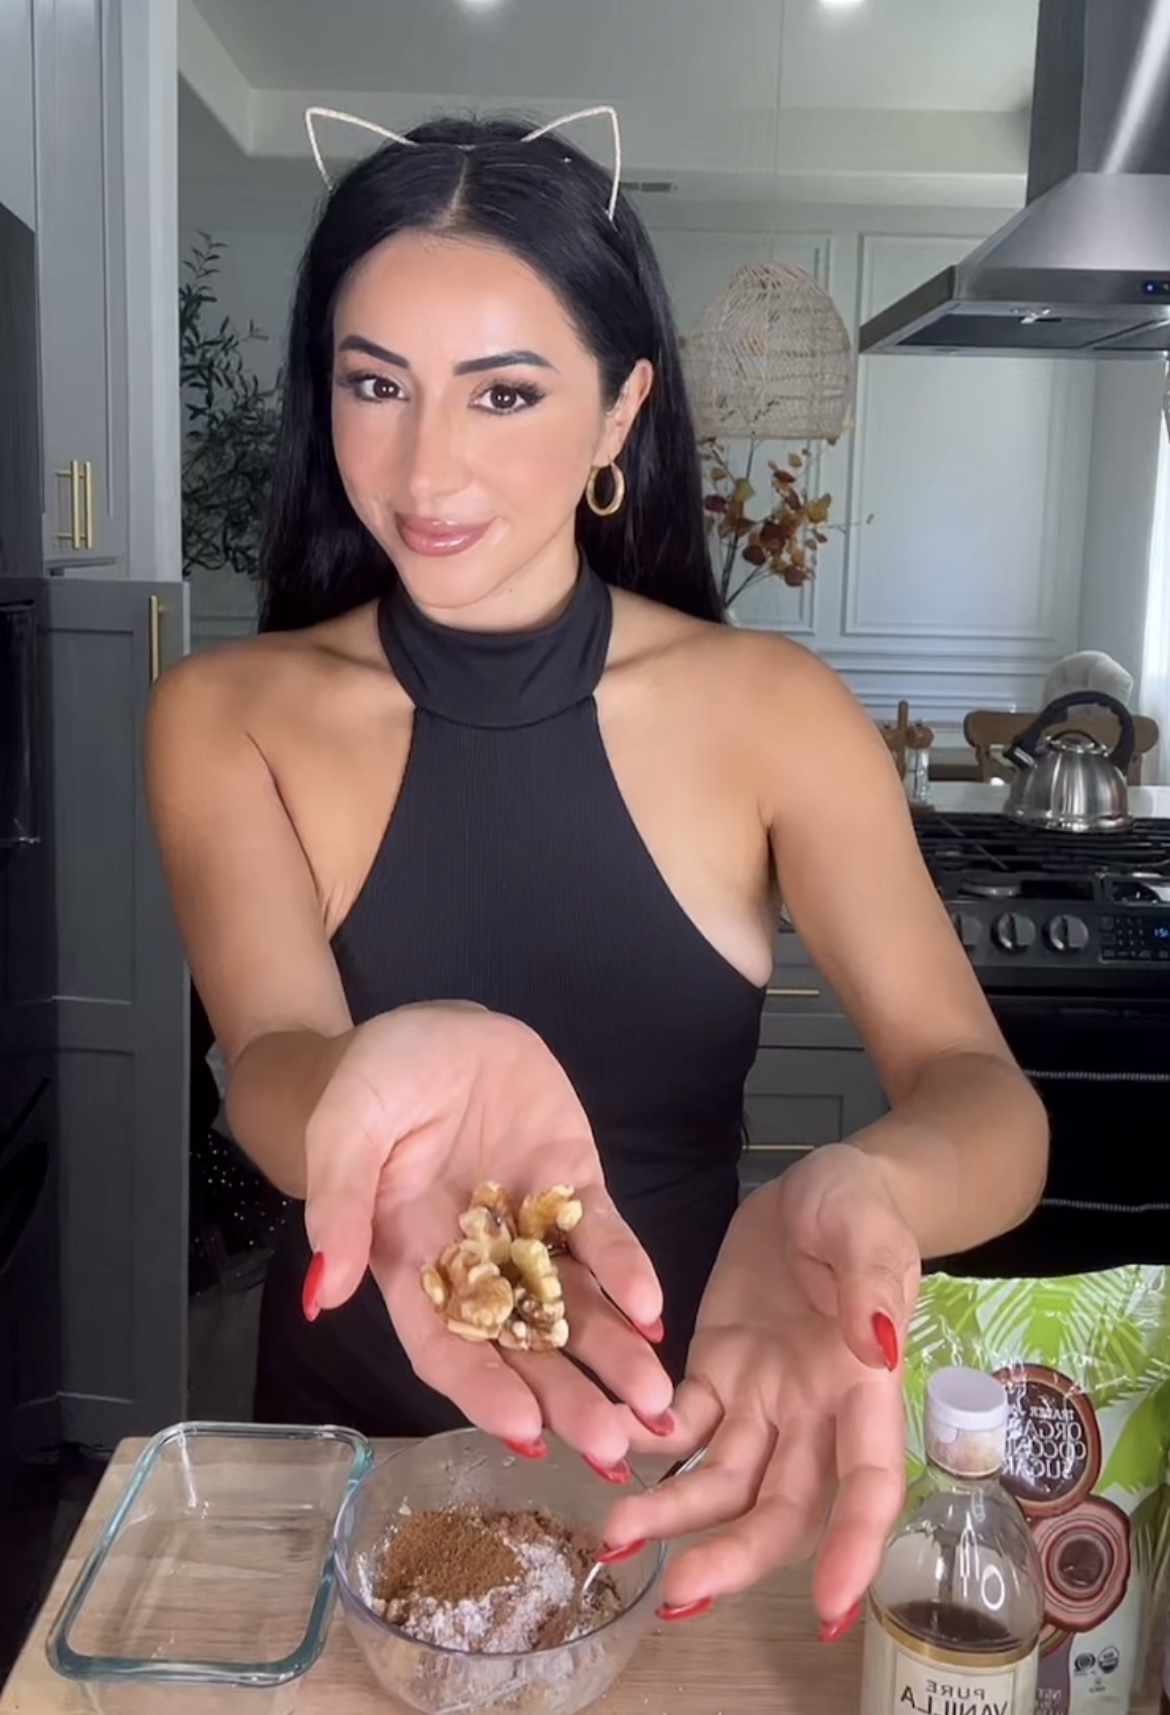 woman wearing cat ears holding walnuts in her hand making chocolate brownies